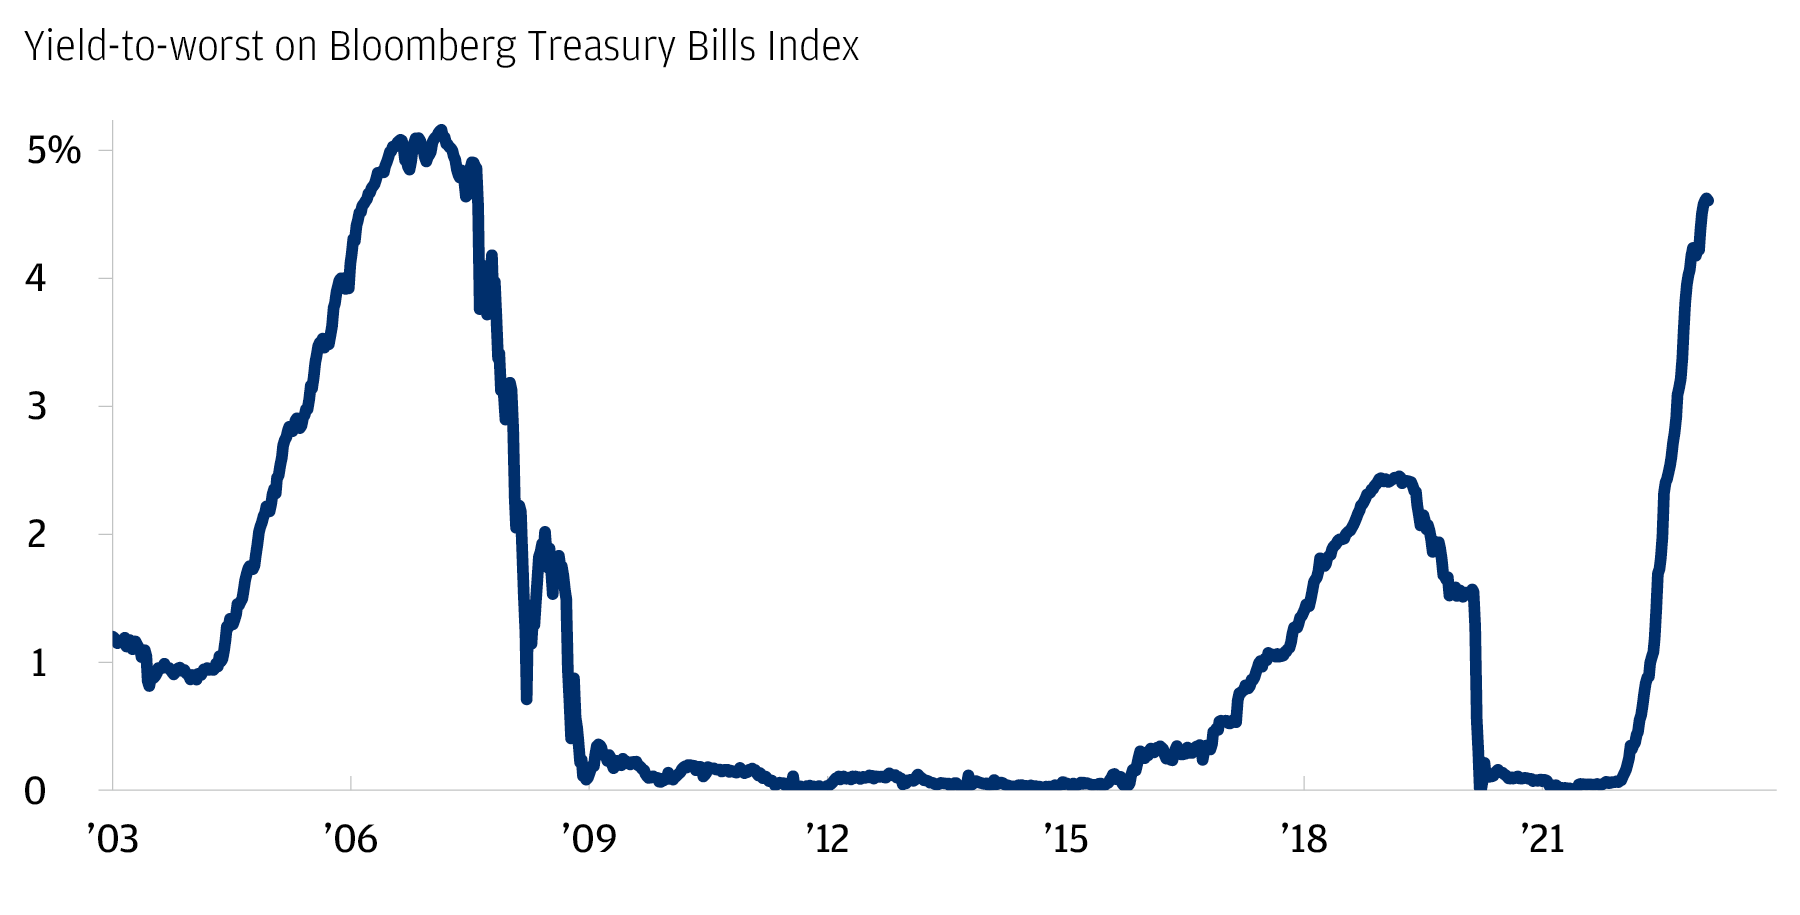 This charts shows the yield to worst of the Bloomberg Treasury Bills Index from 2003 to 2023.